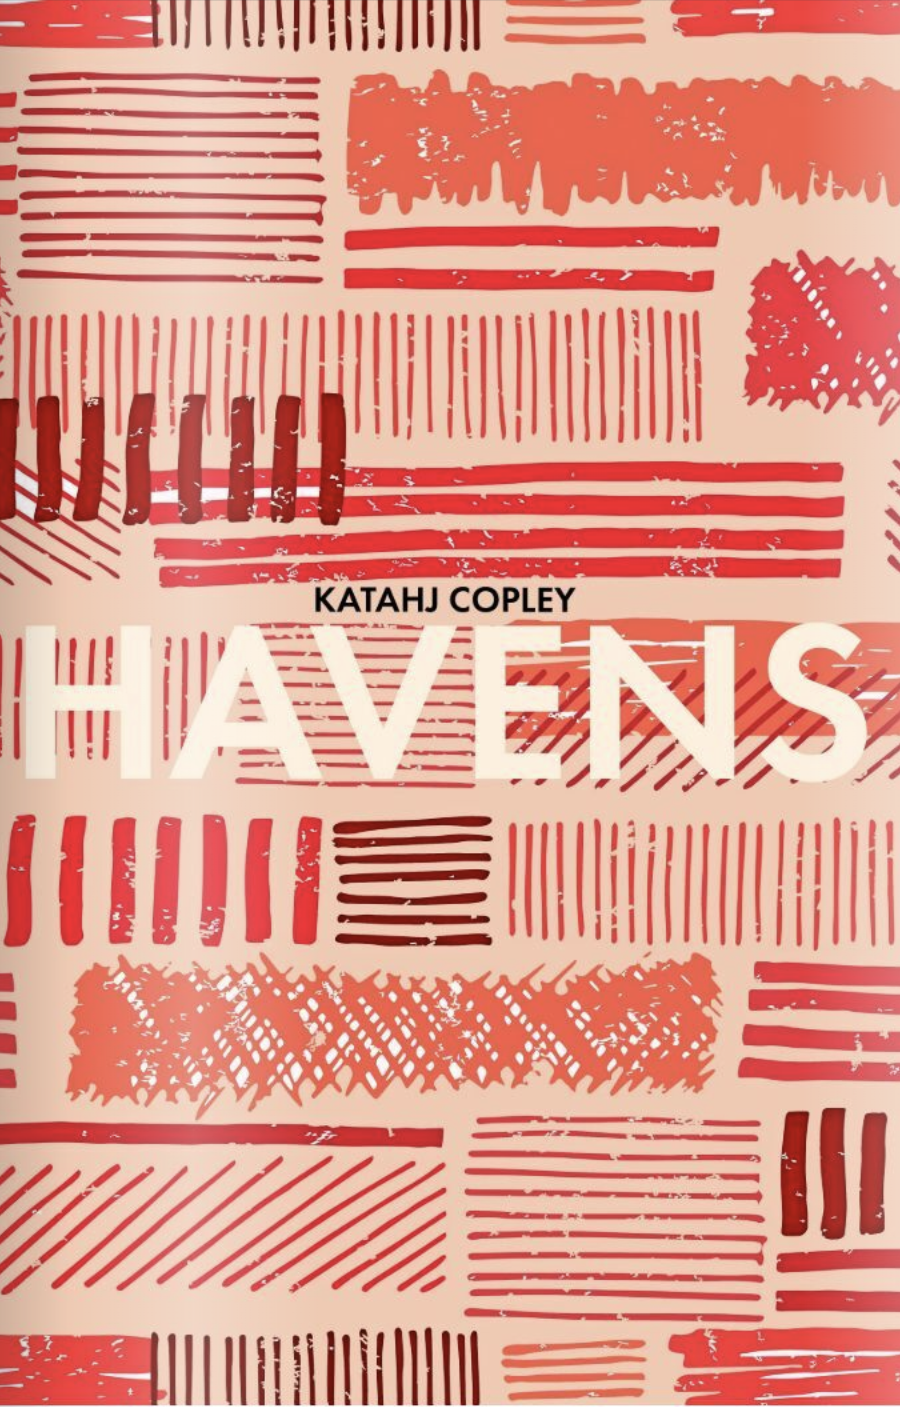 Havens (Score Only) by Katahj Copley